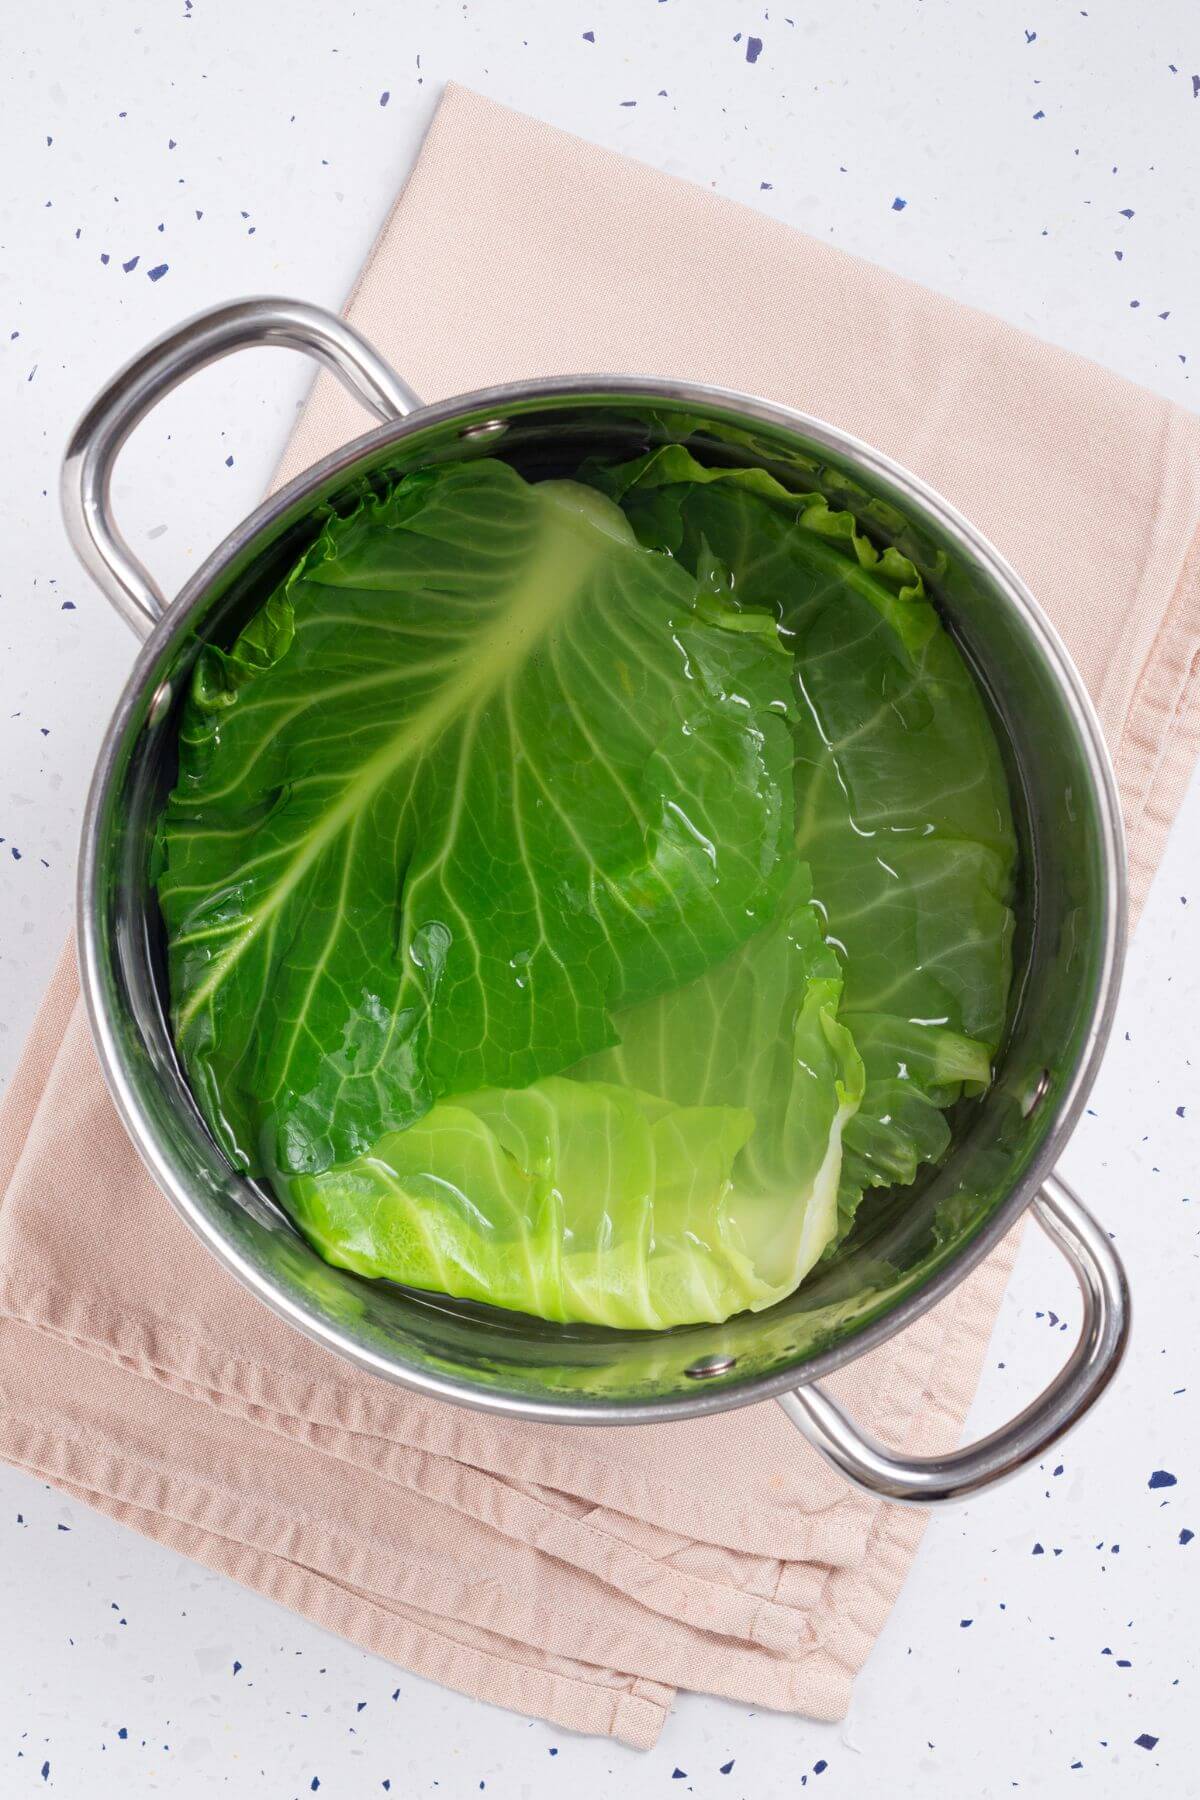 Boiling cabbage leaves in large pan.